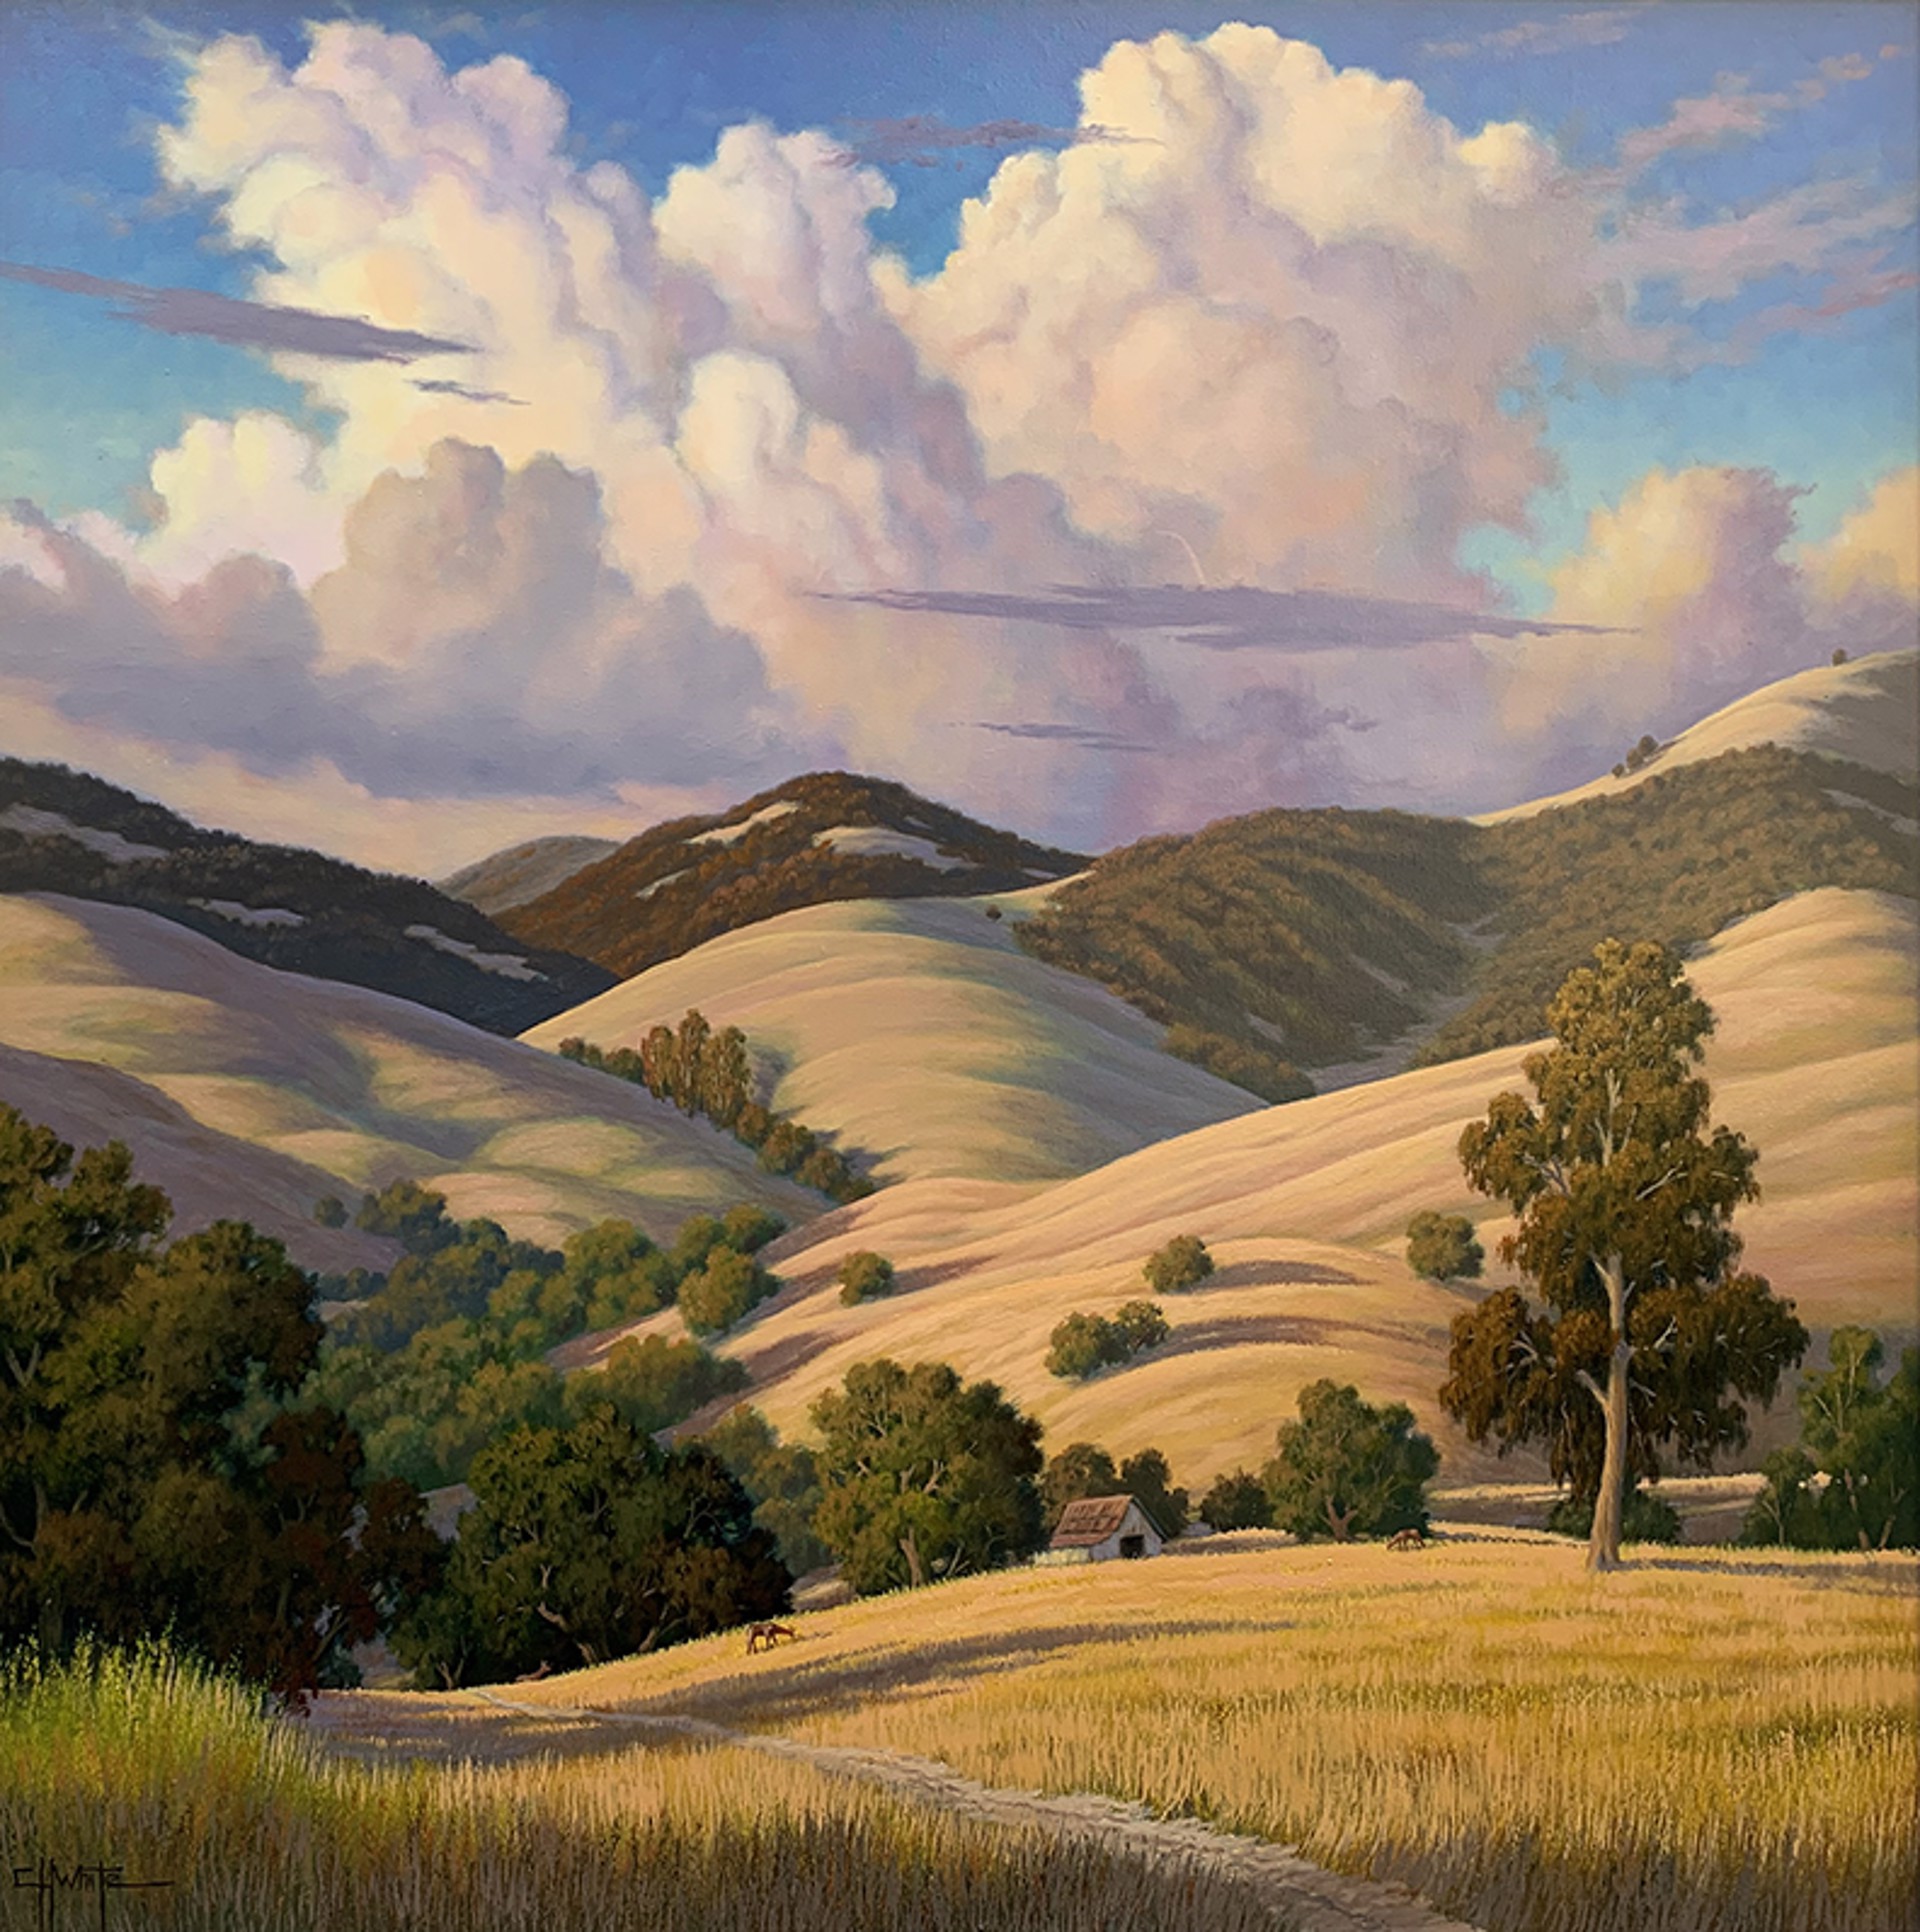 California Foothills by Charles White